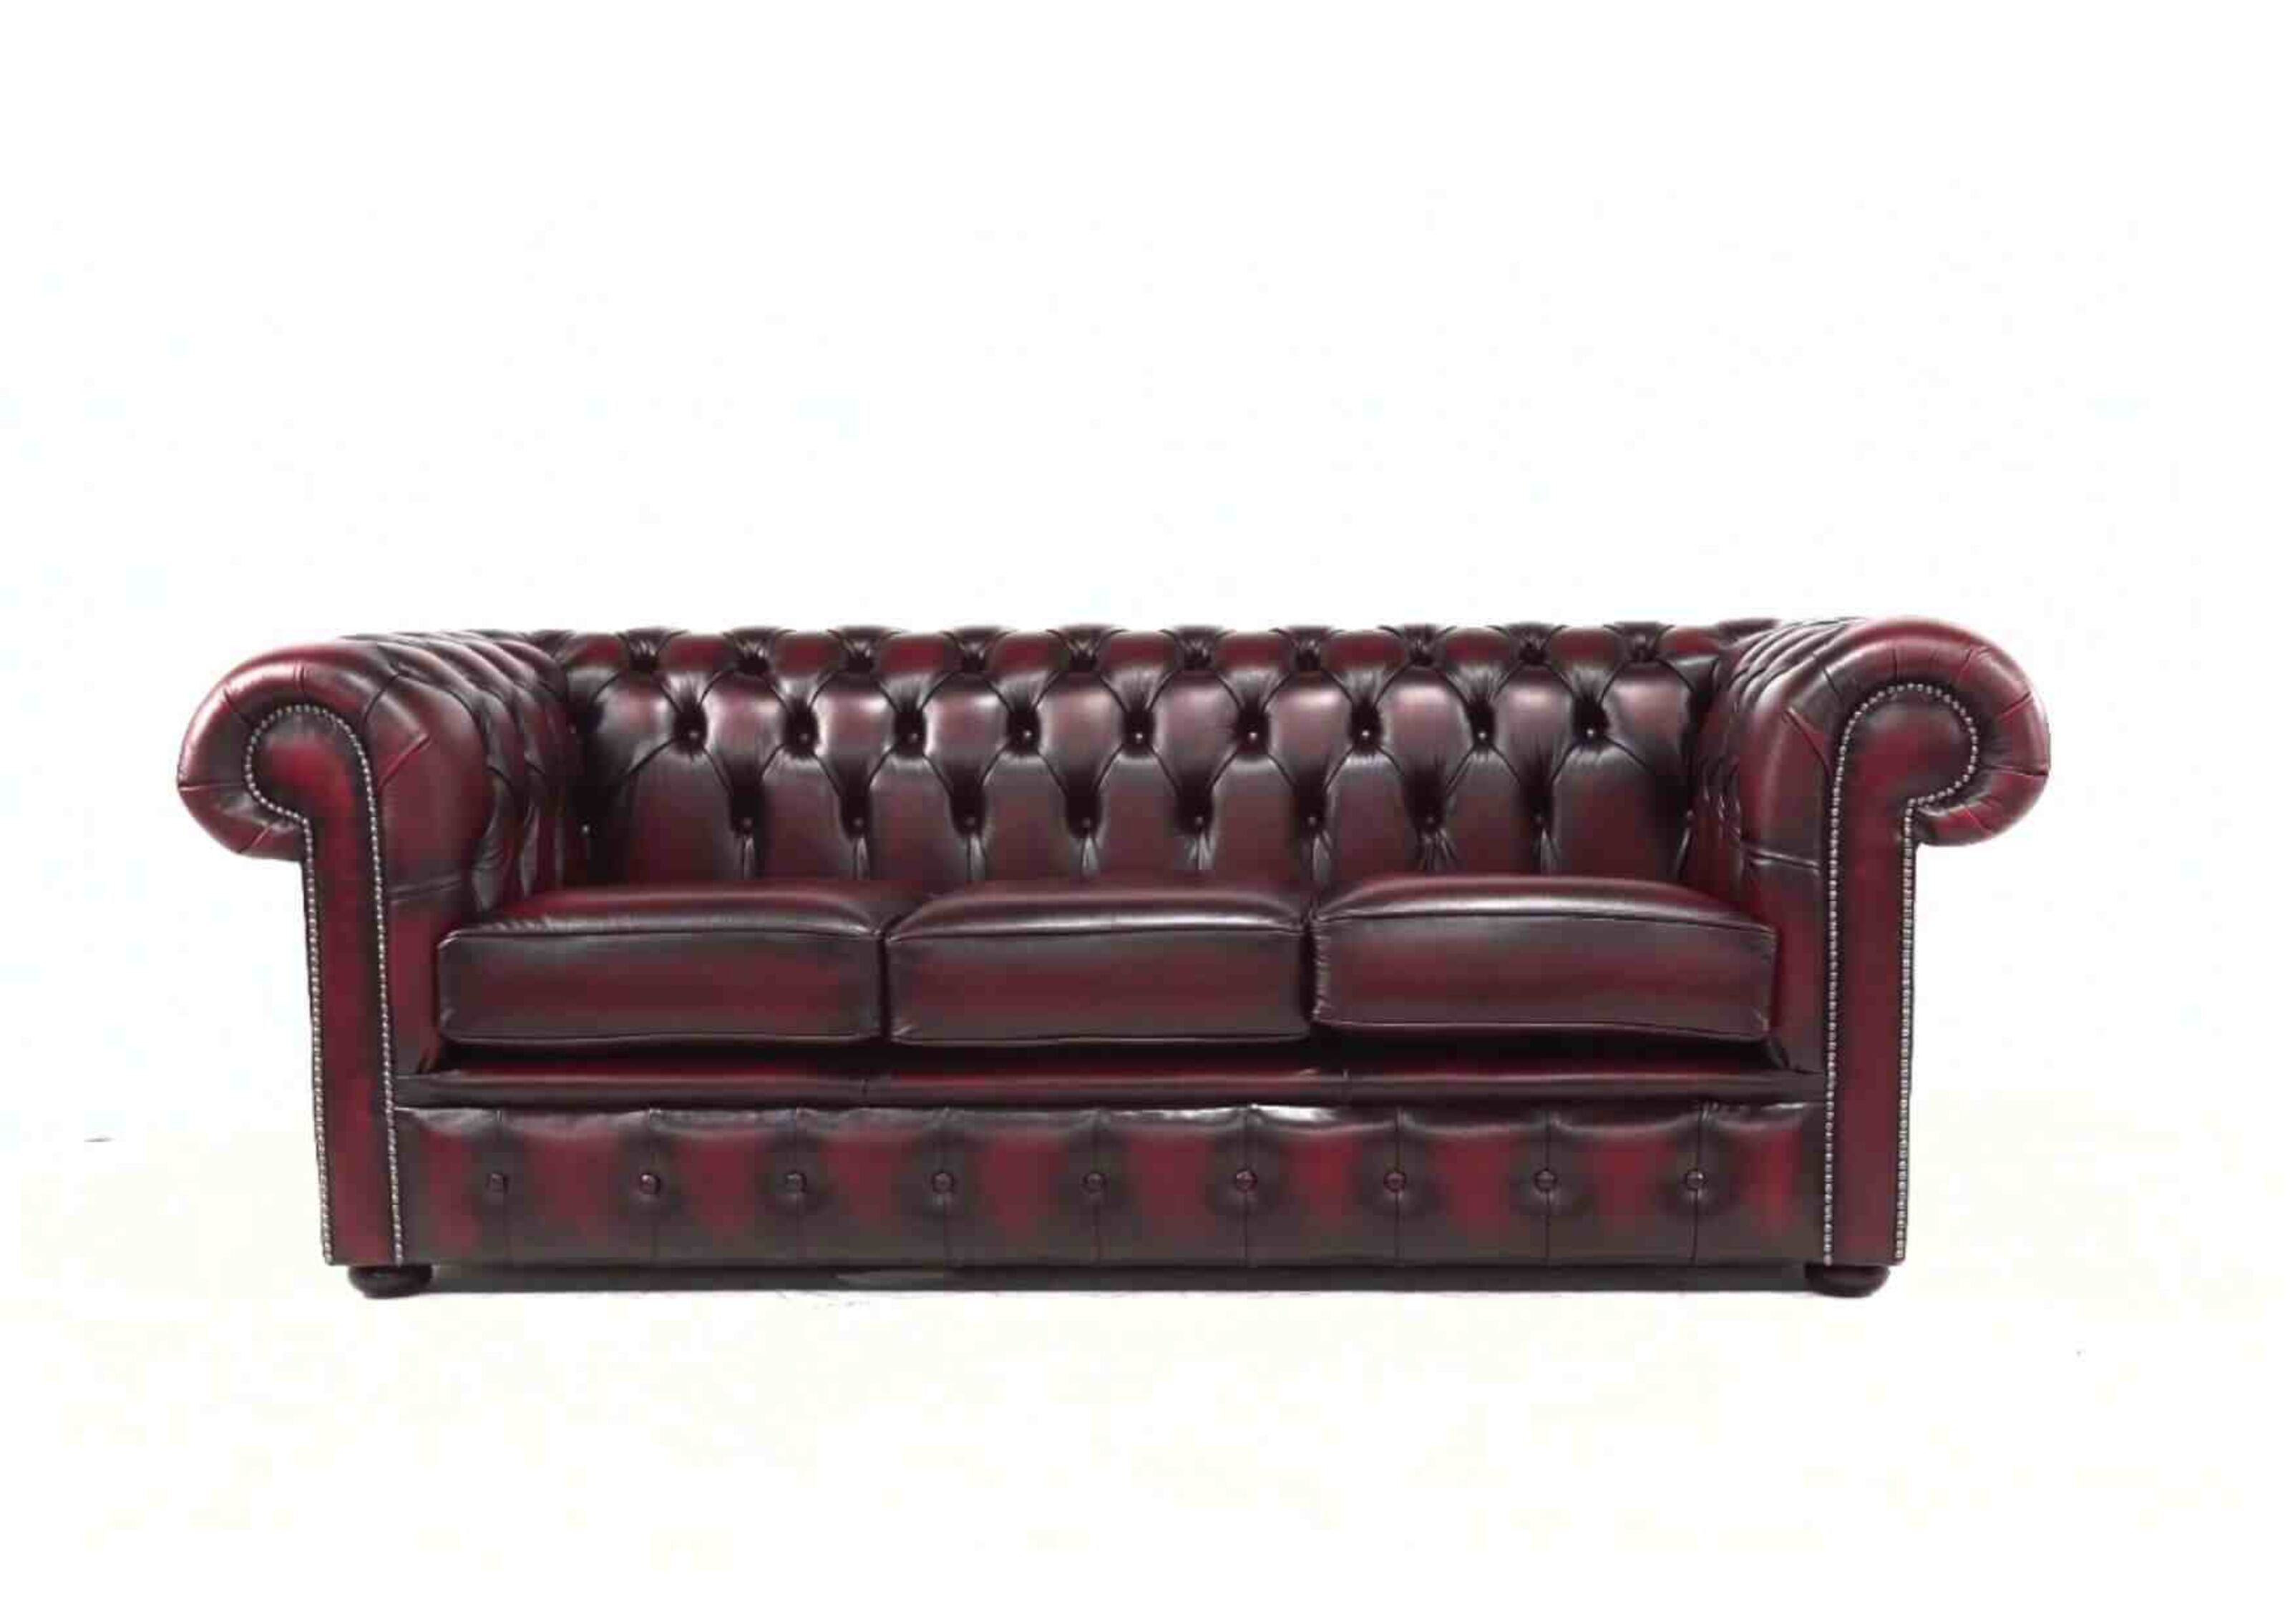 Hunting for Chesterfields Exploring Huddersfield's Sofa Selection  %Post Title